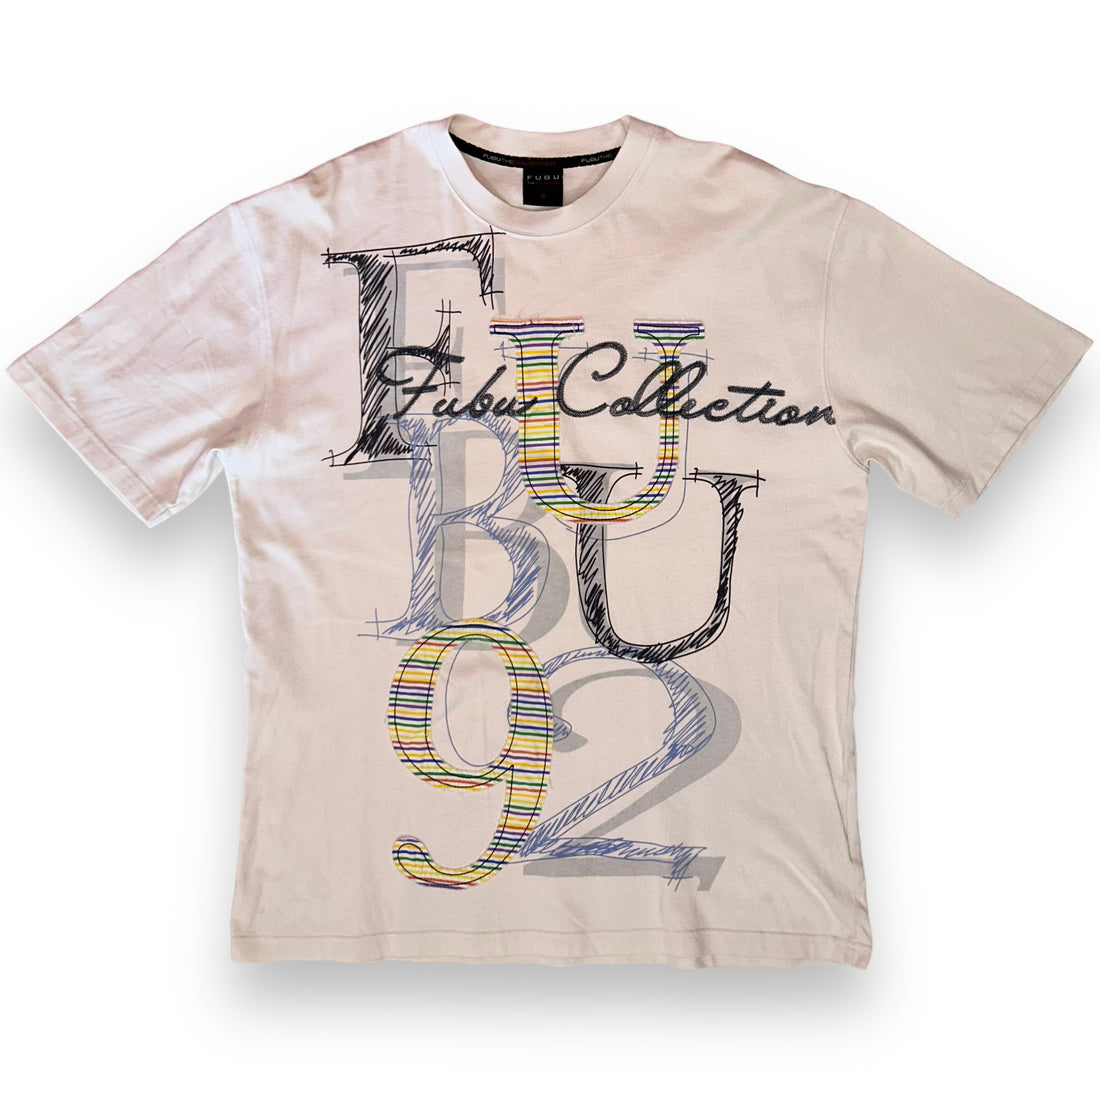 FUBU The Collection Vintage Tee (L)